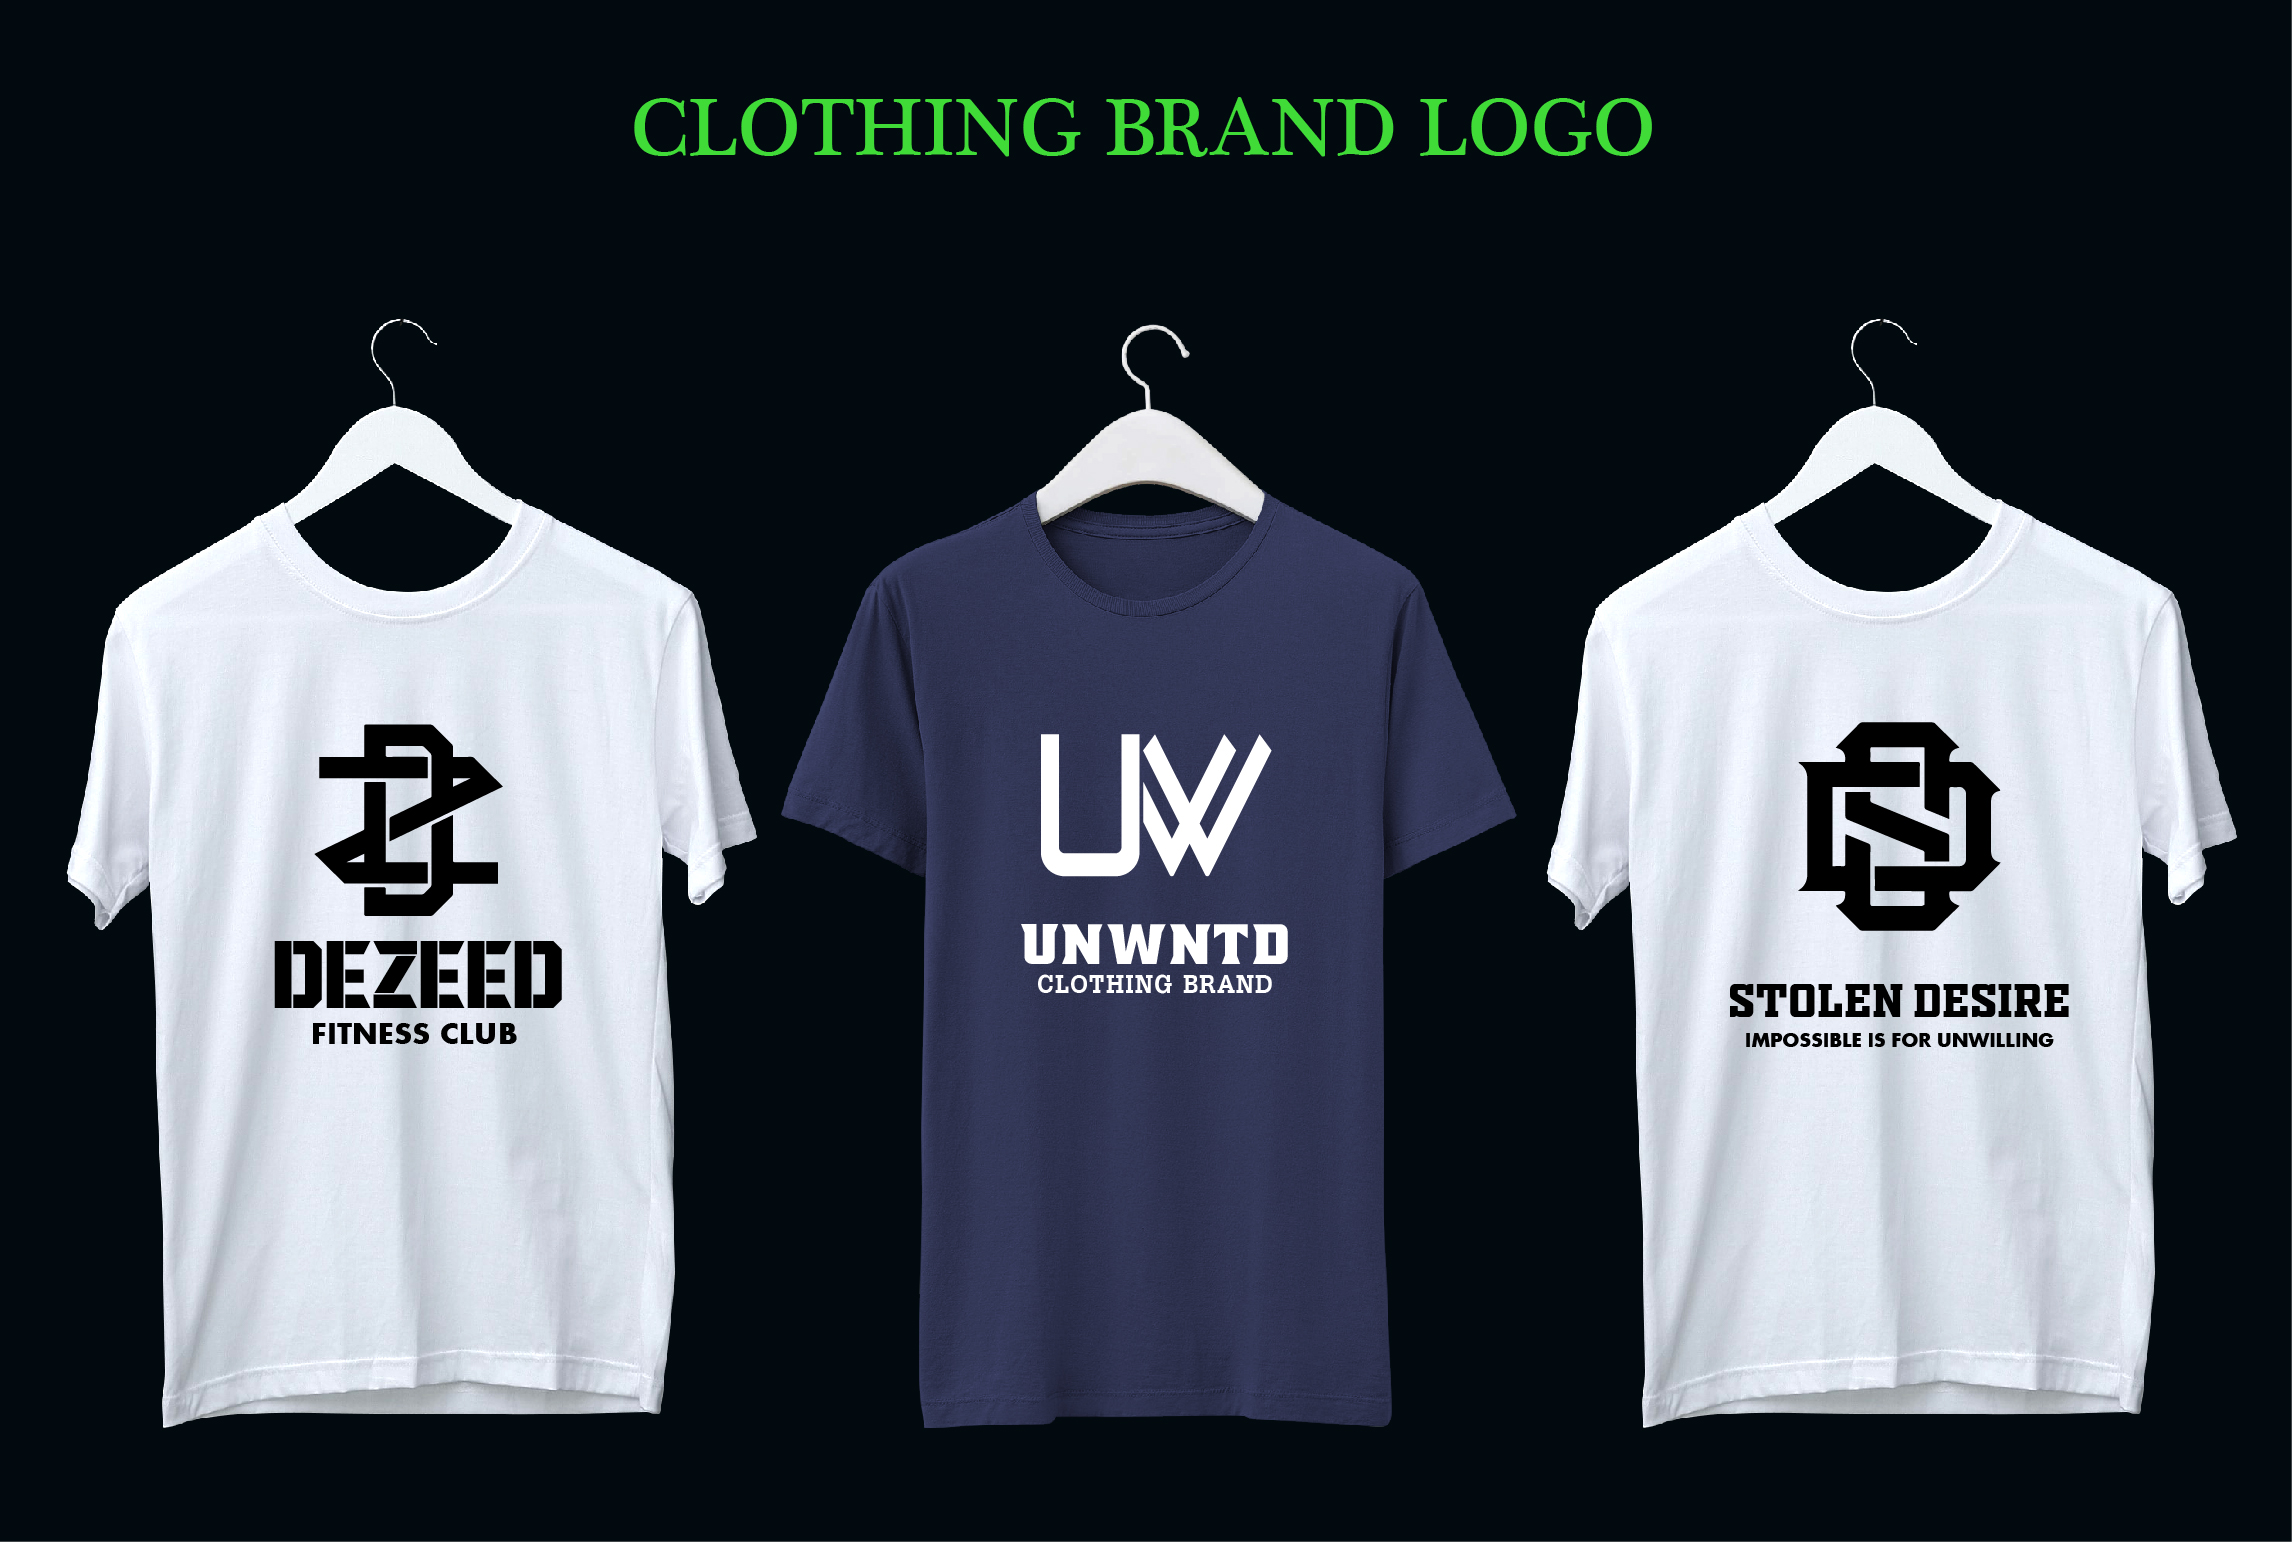 Clothing brand logo with initial letters for $5 - SEOClerks